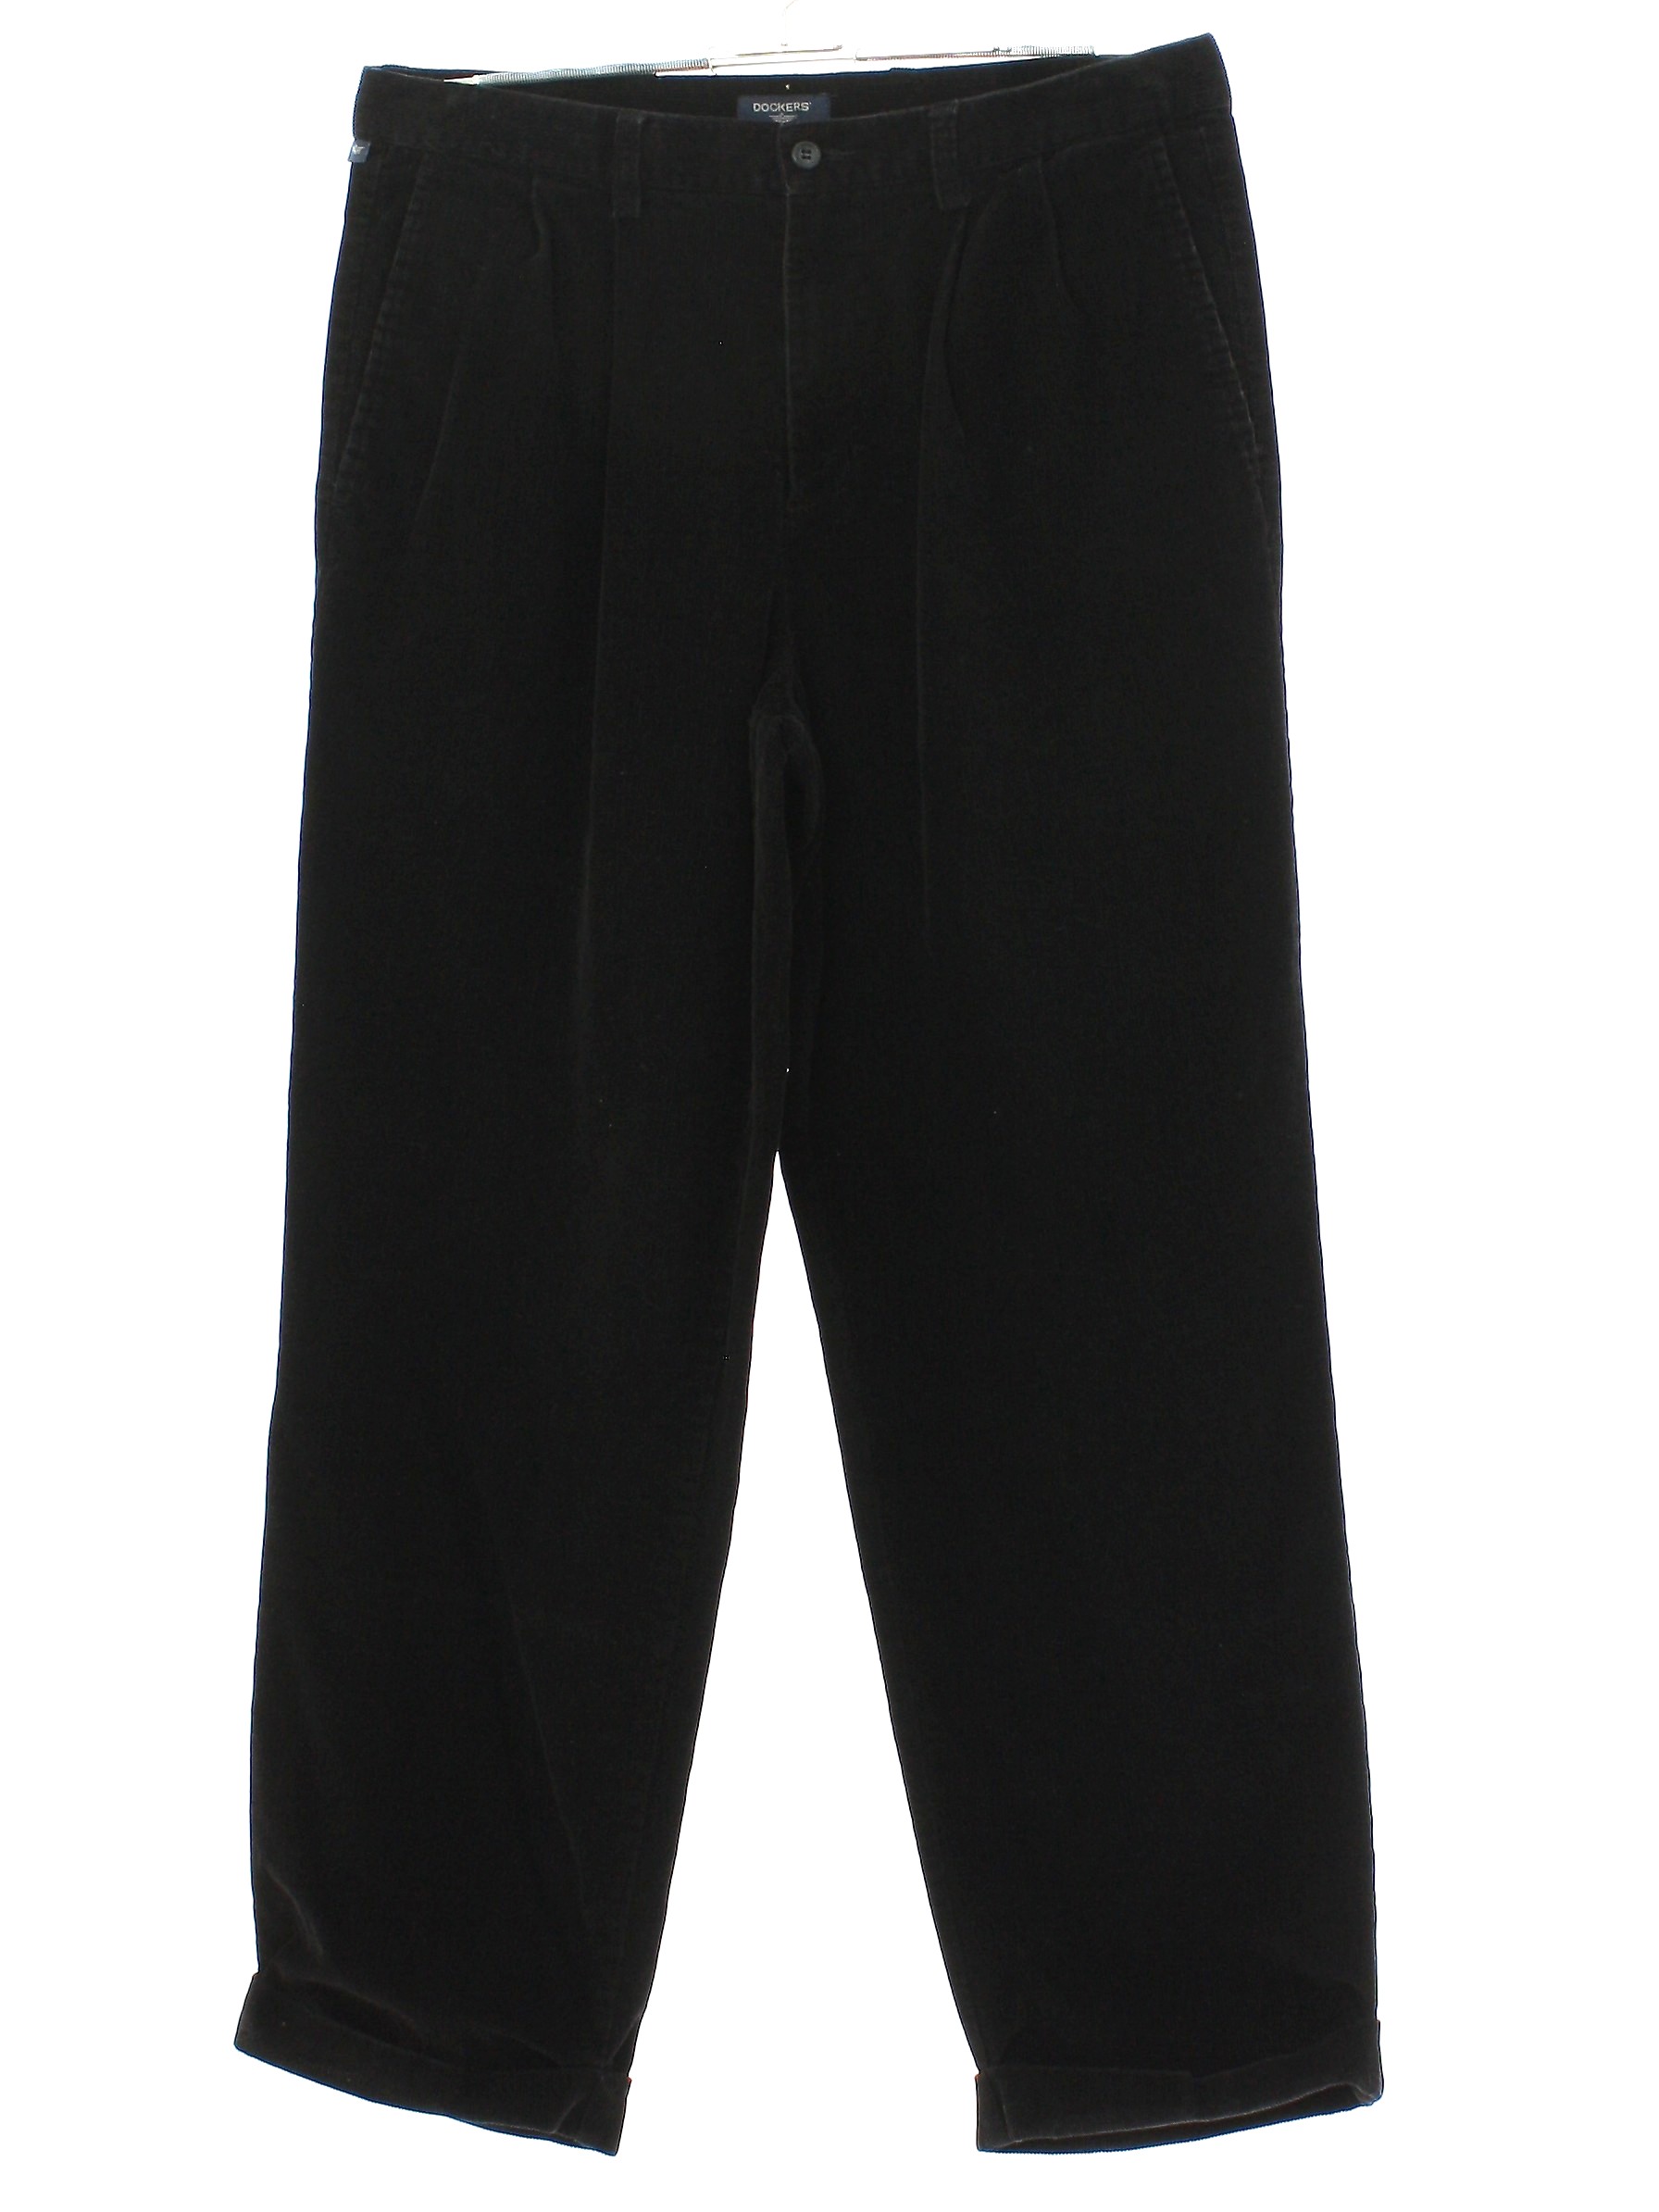 Retro 90's Pants: Late 90s -Dockers- Mens slightly faded black solid ...